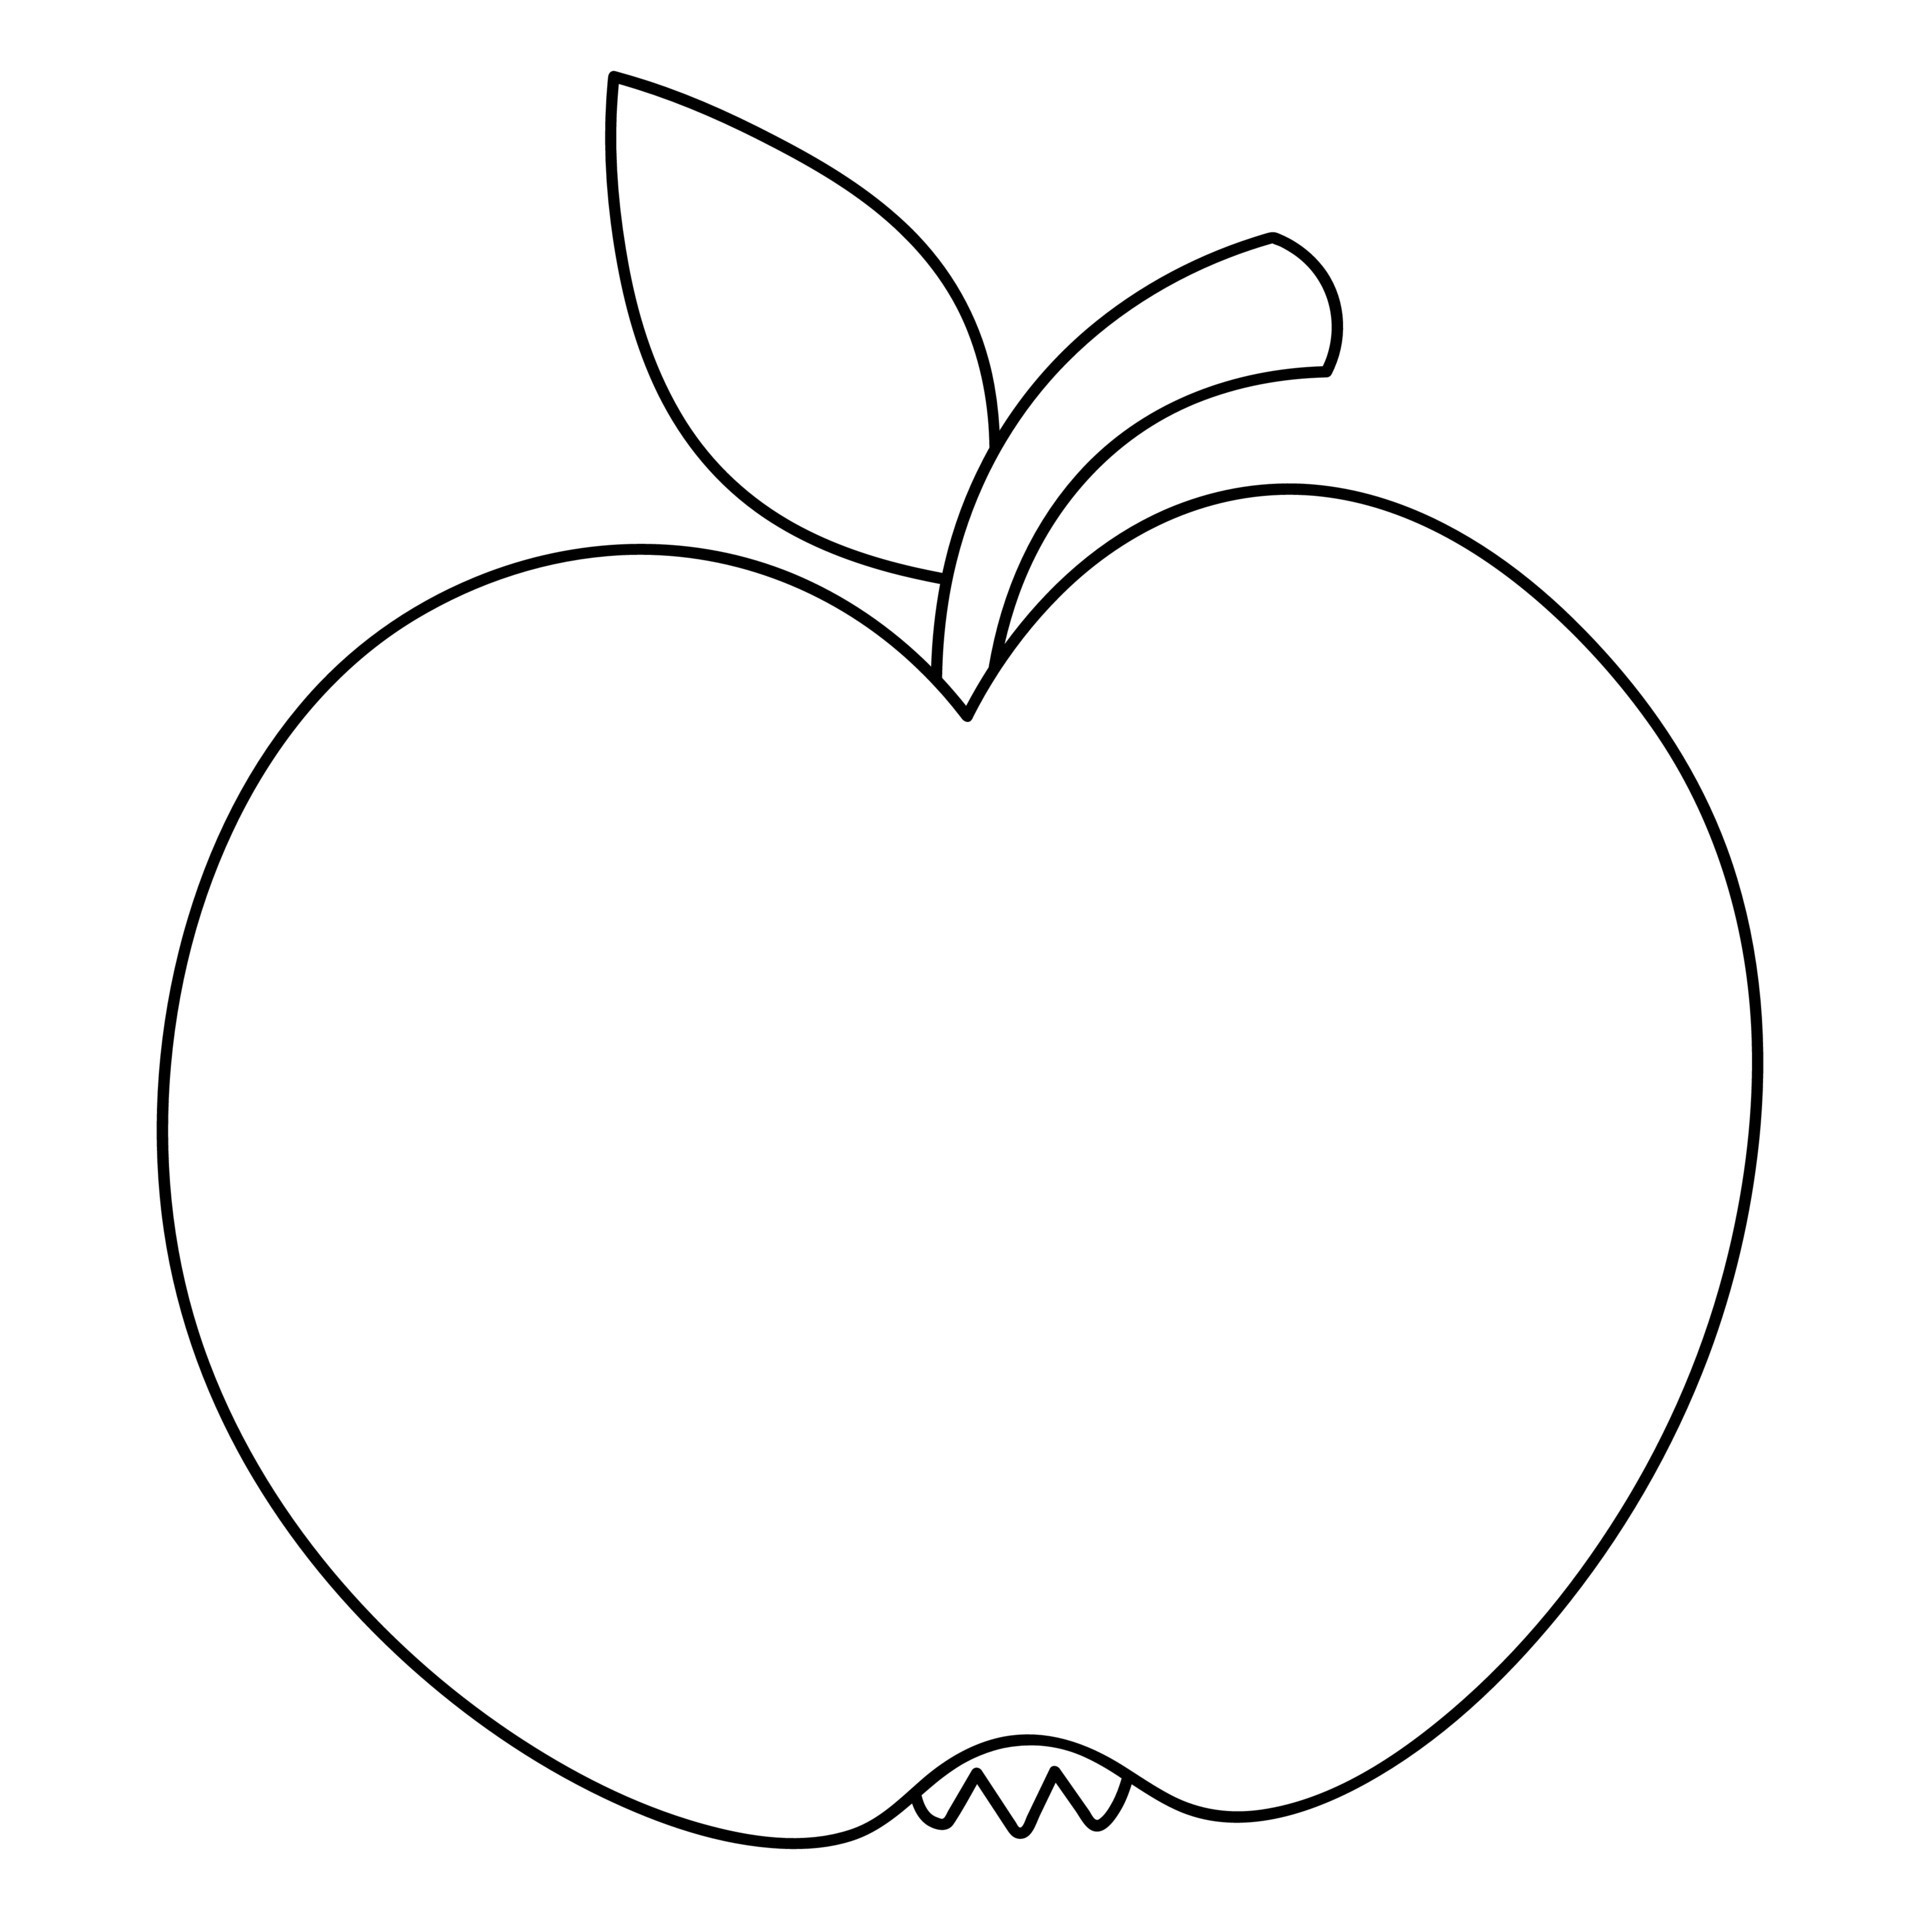 Apple. Delicious fruit with a leaf. Sketch. Harvesting. SJuicy fruit ...